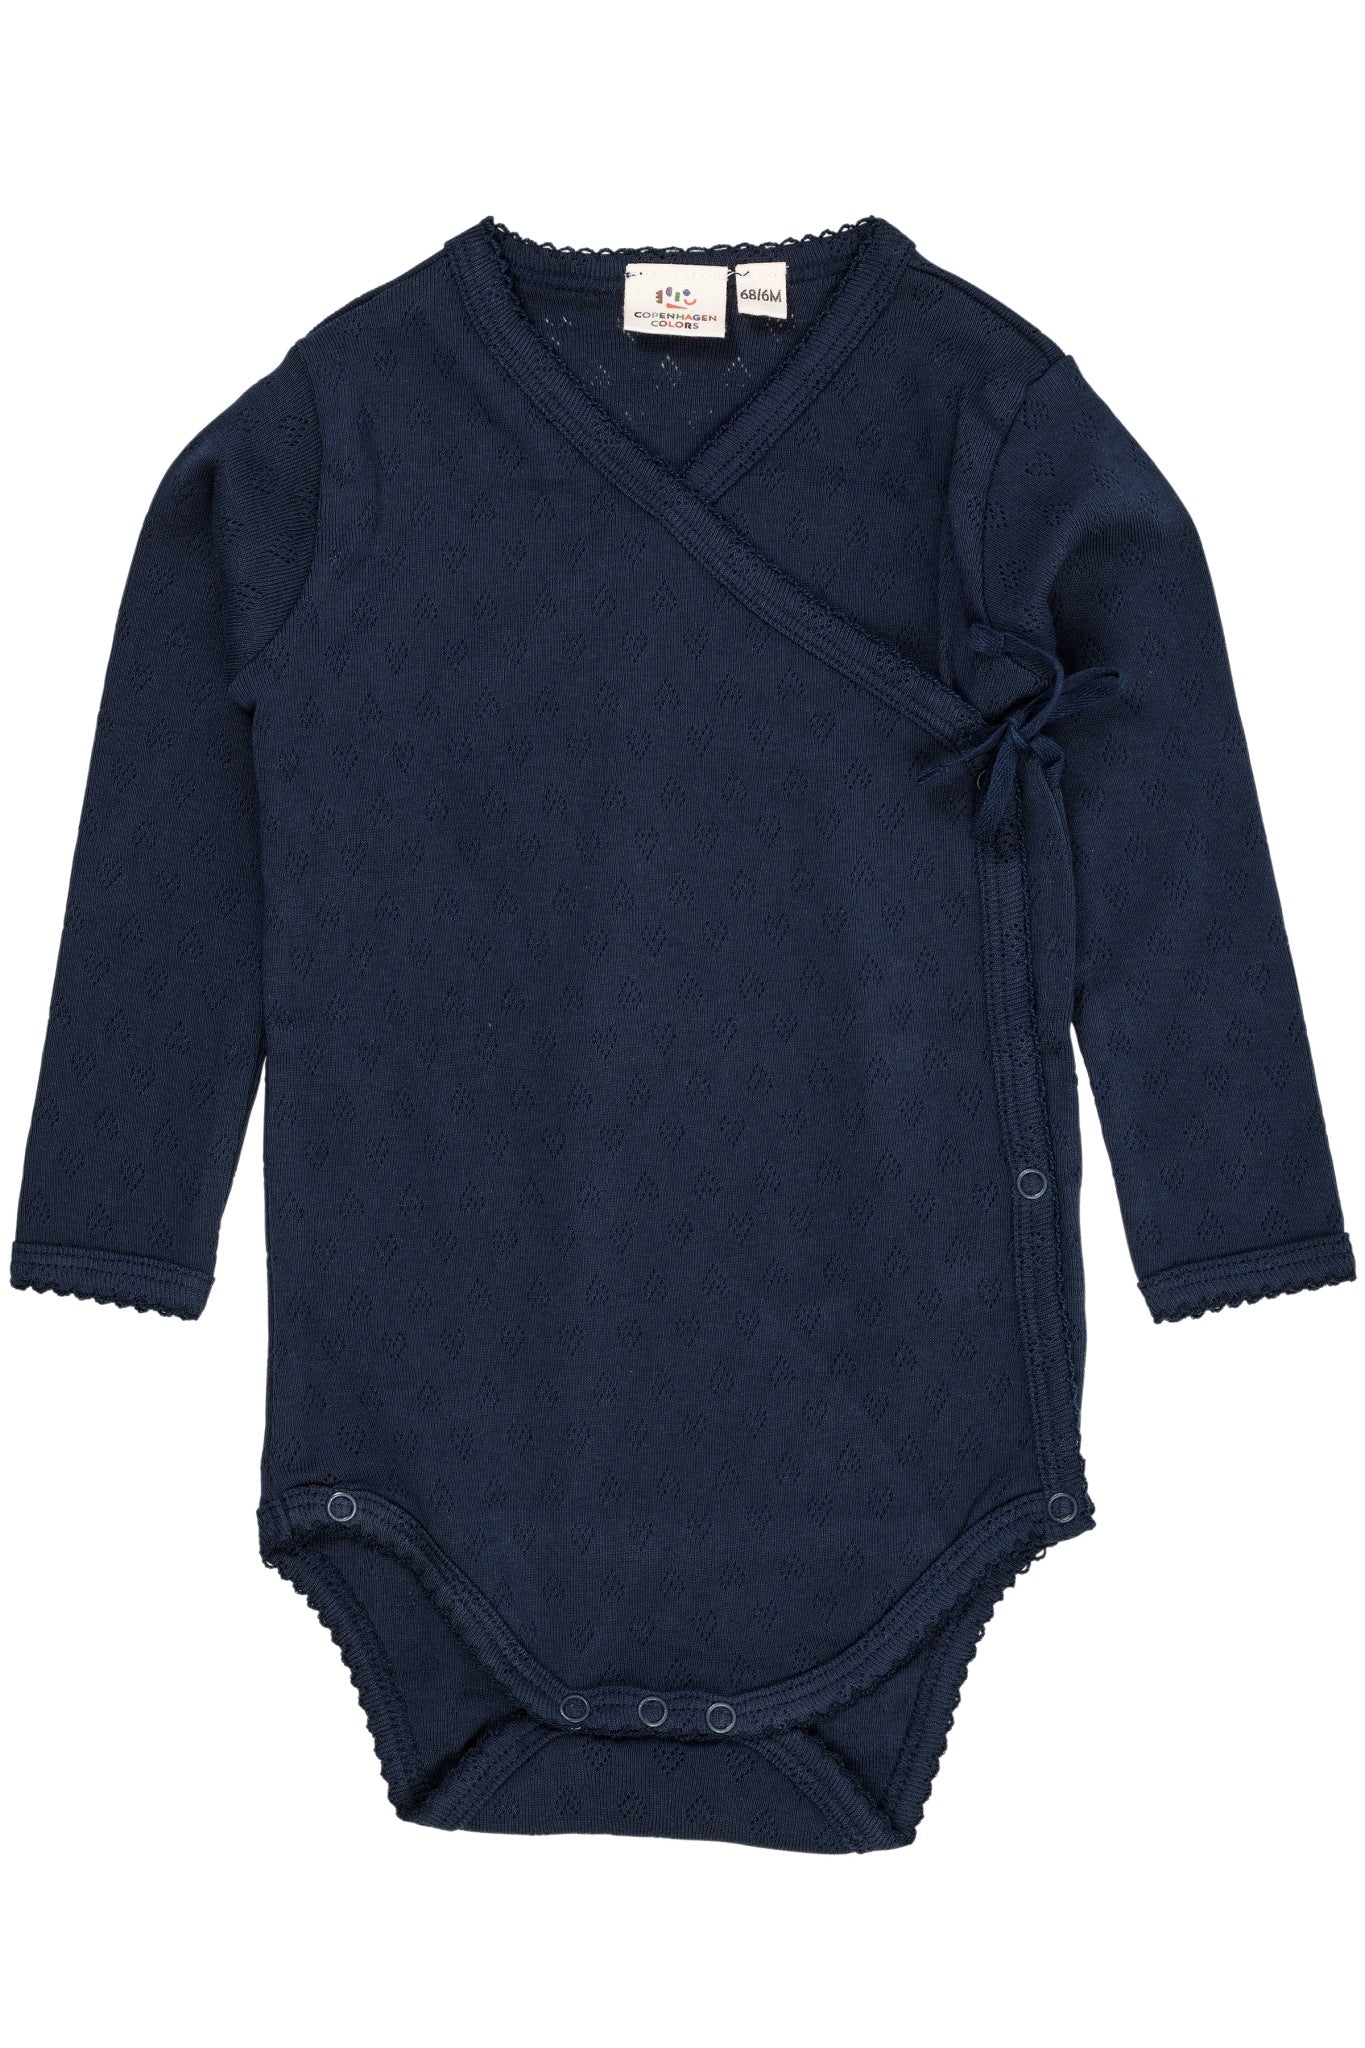 POINTELLE HEART CROSSOVER BODY LS - NAVY